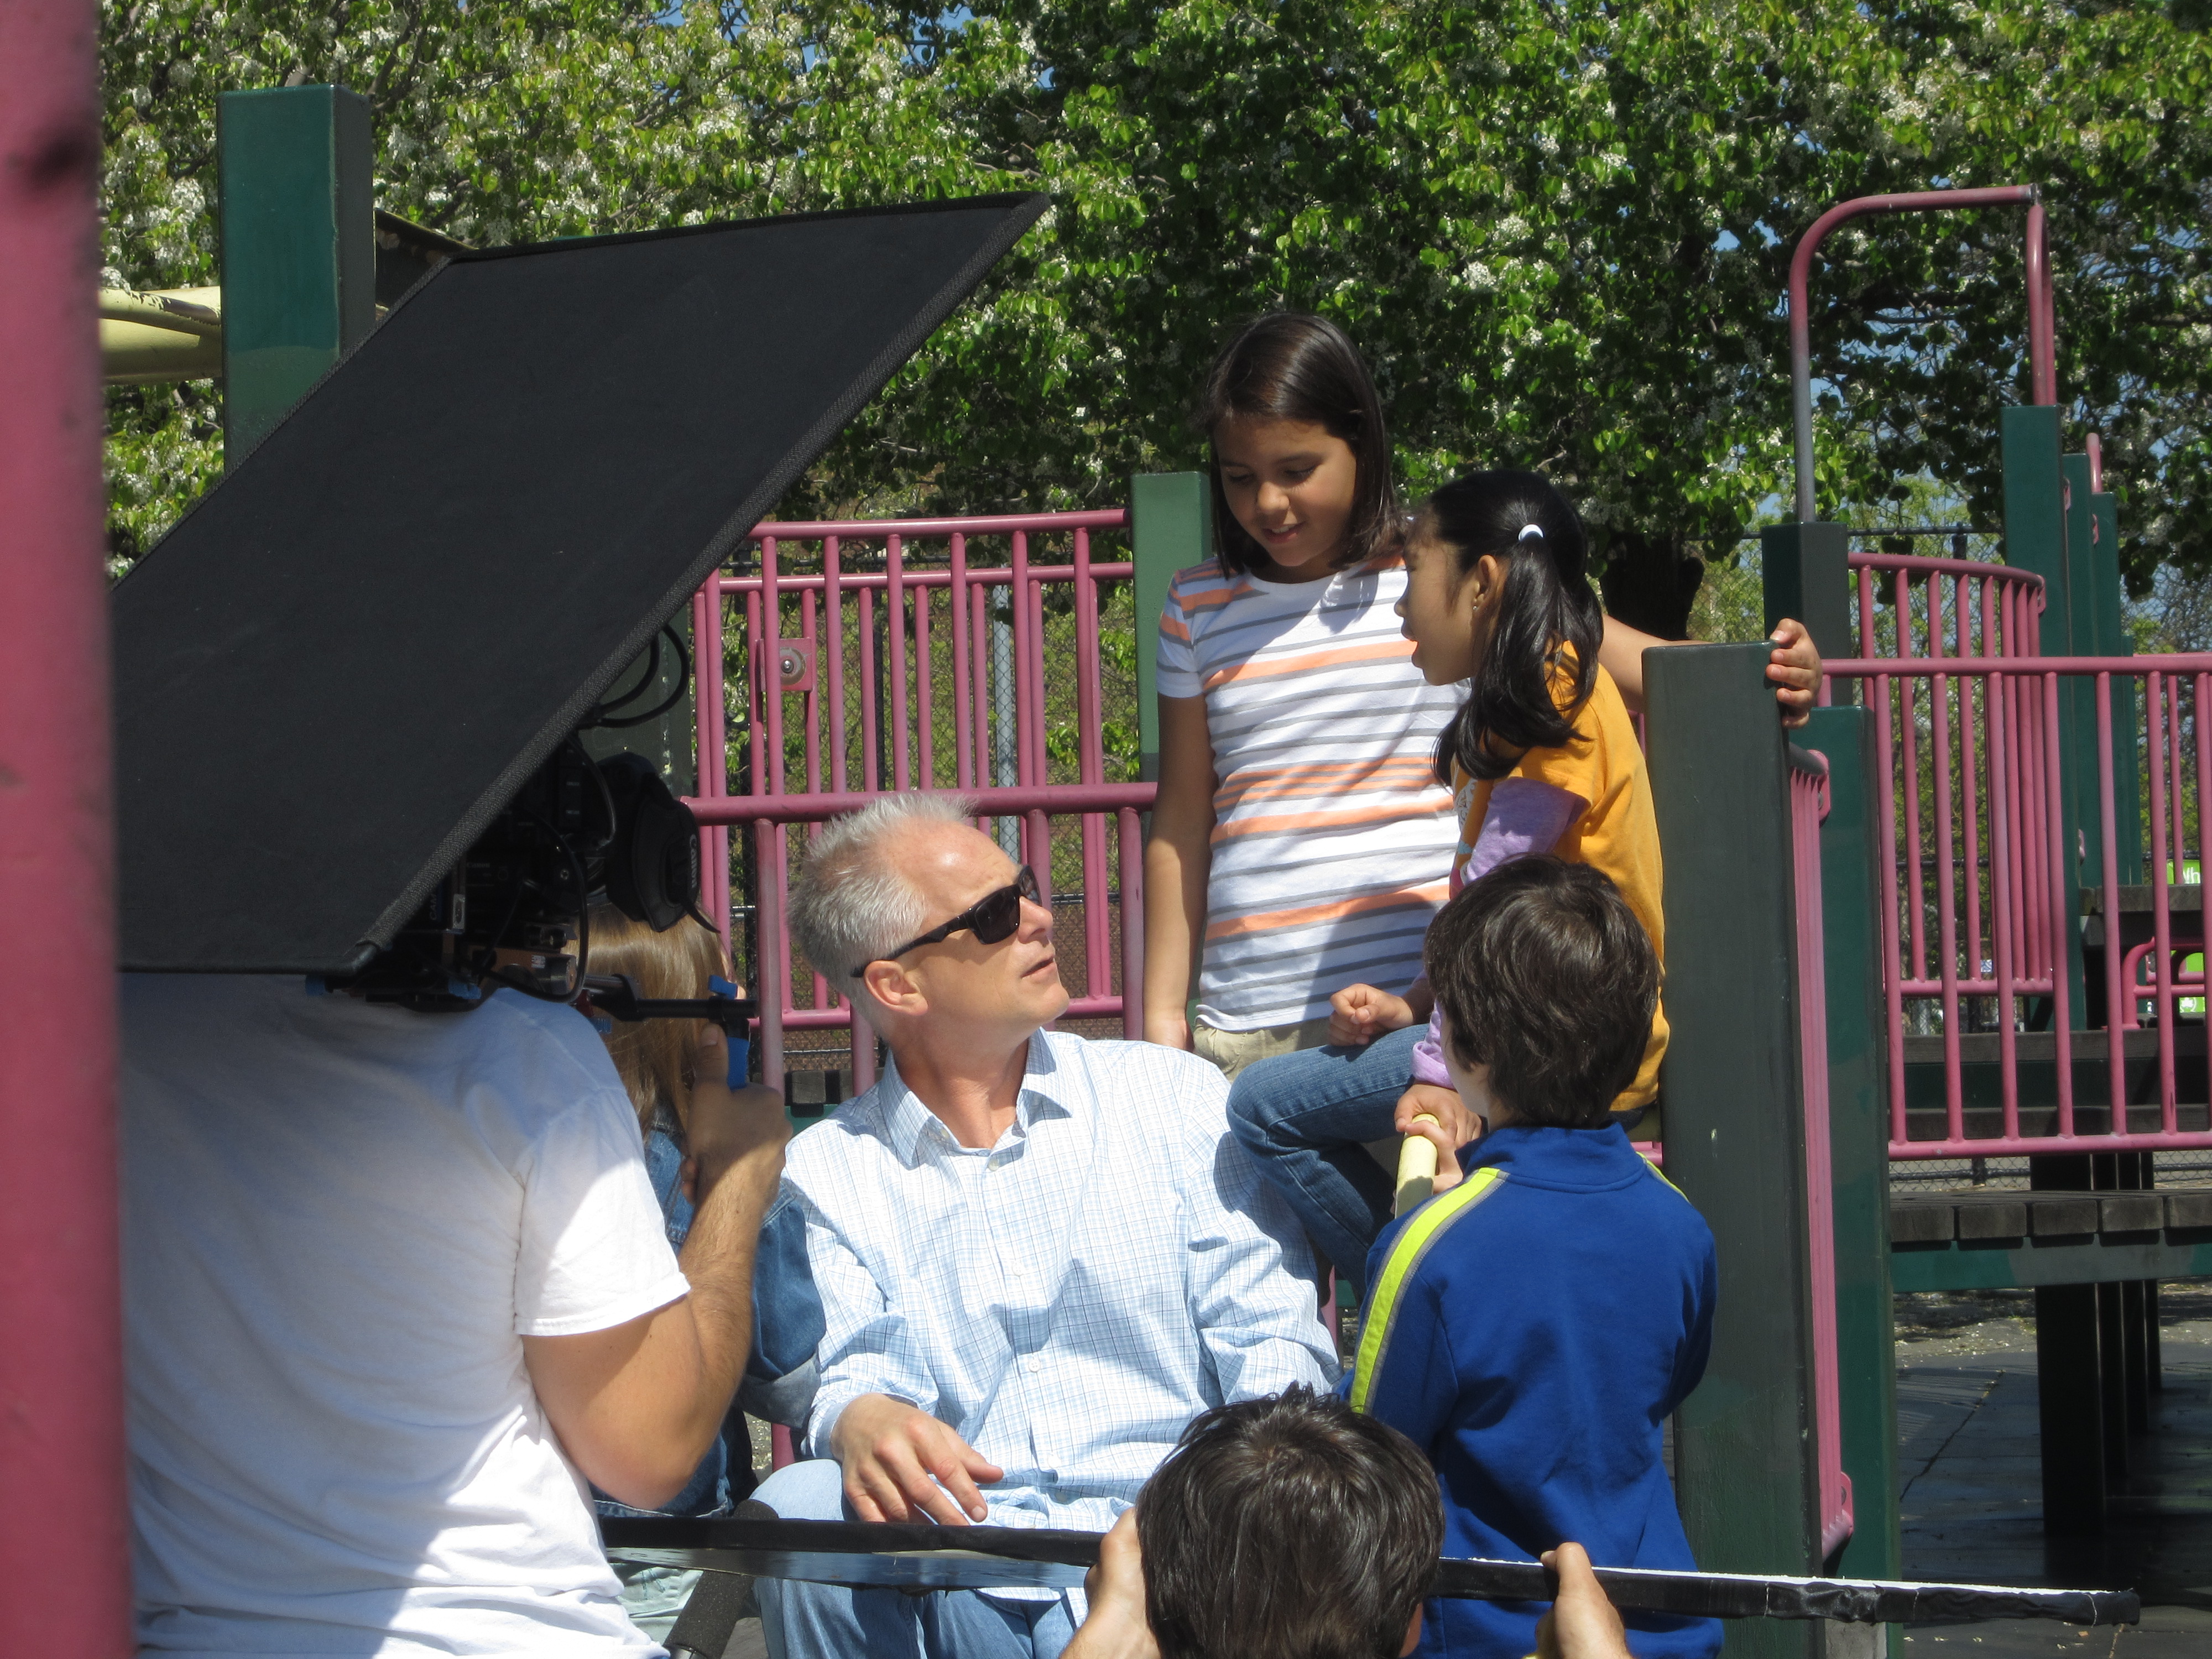 On set of Snapple commercial with Kenny Mayne, May 2013